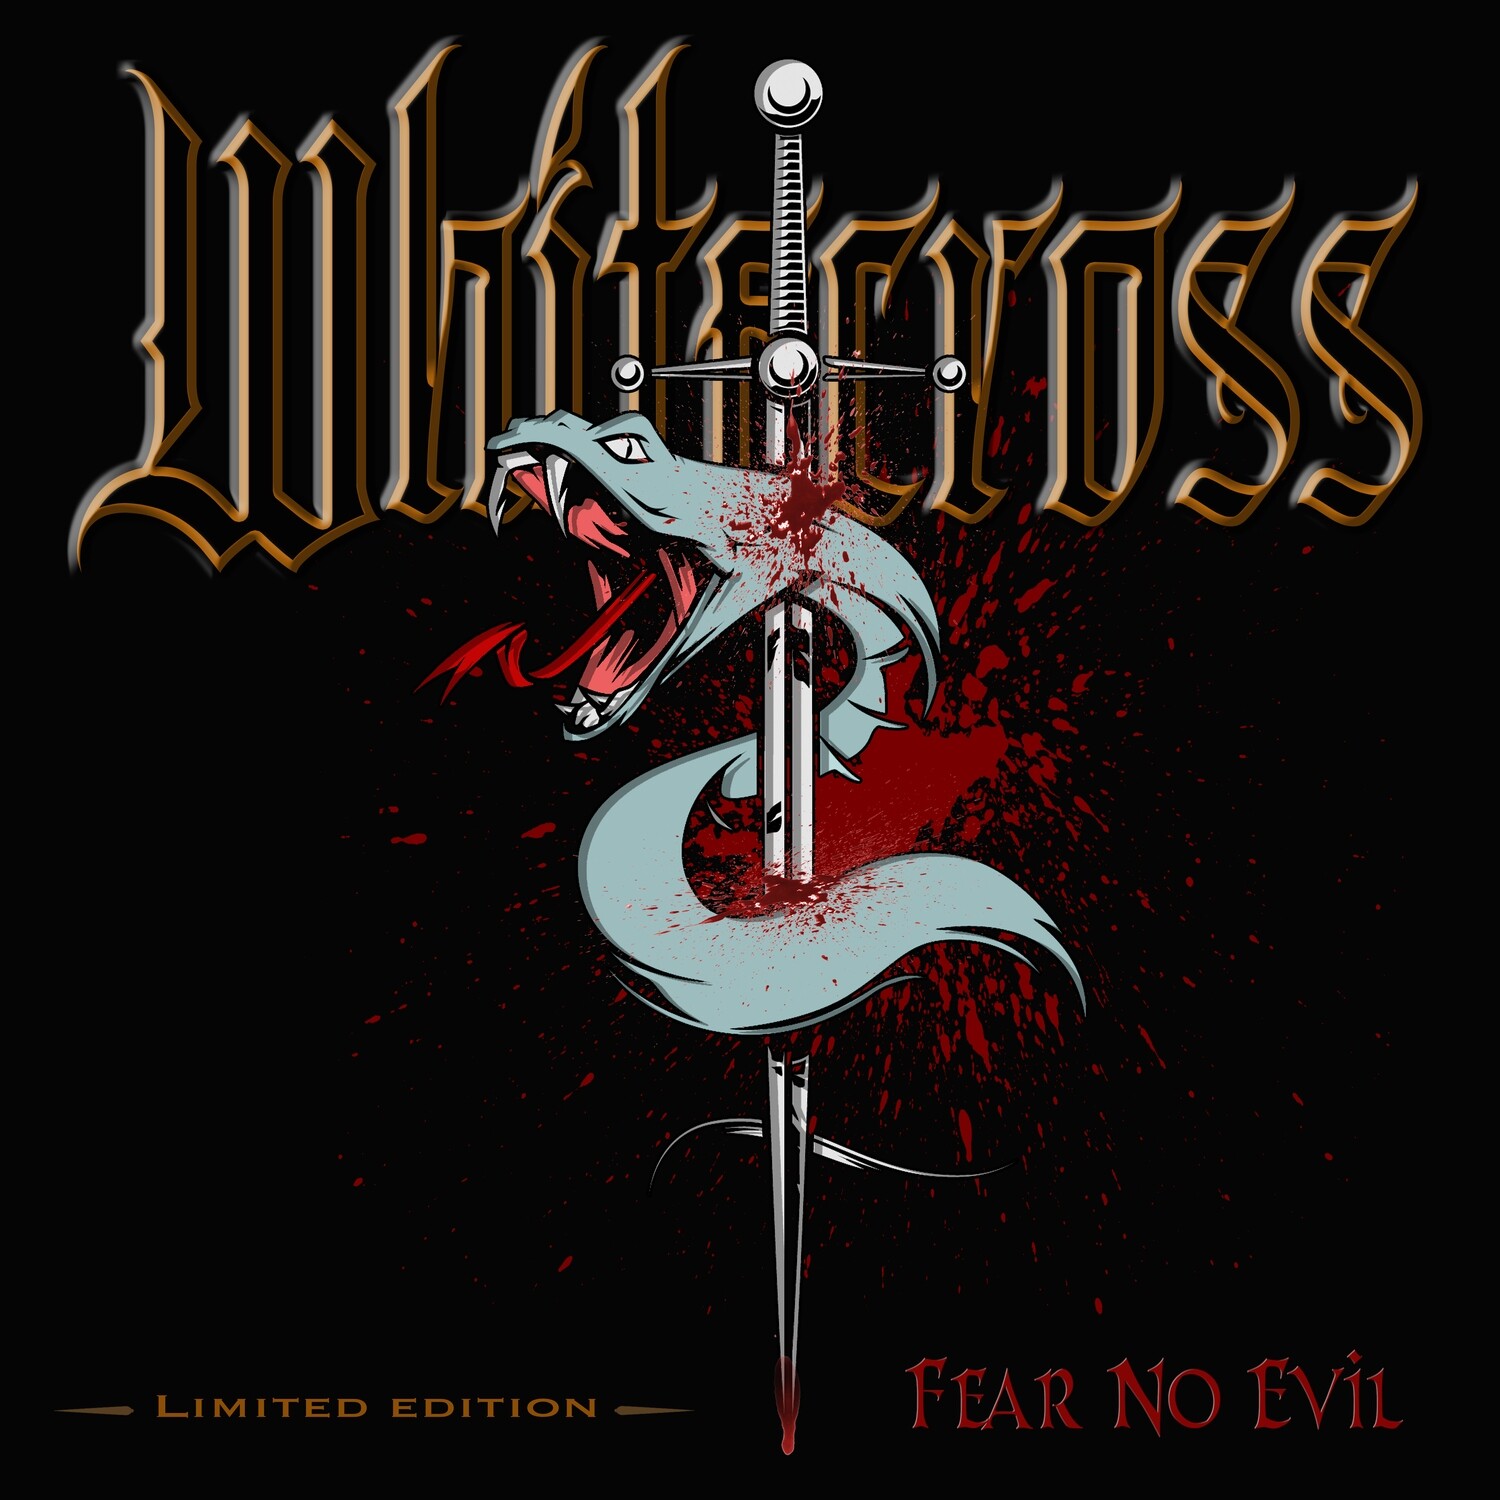 Fear No Evil by Whitecross [CD]